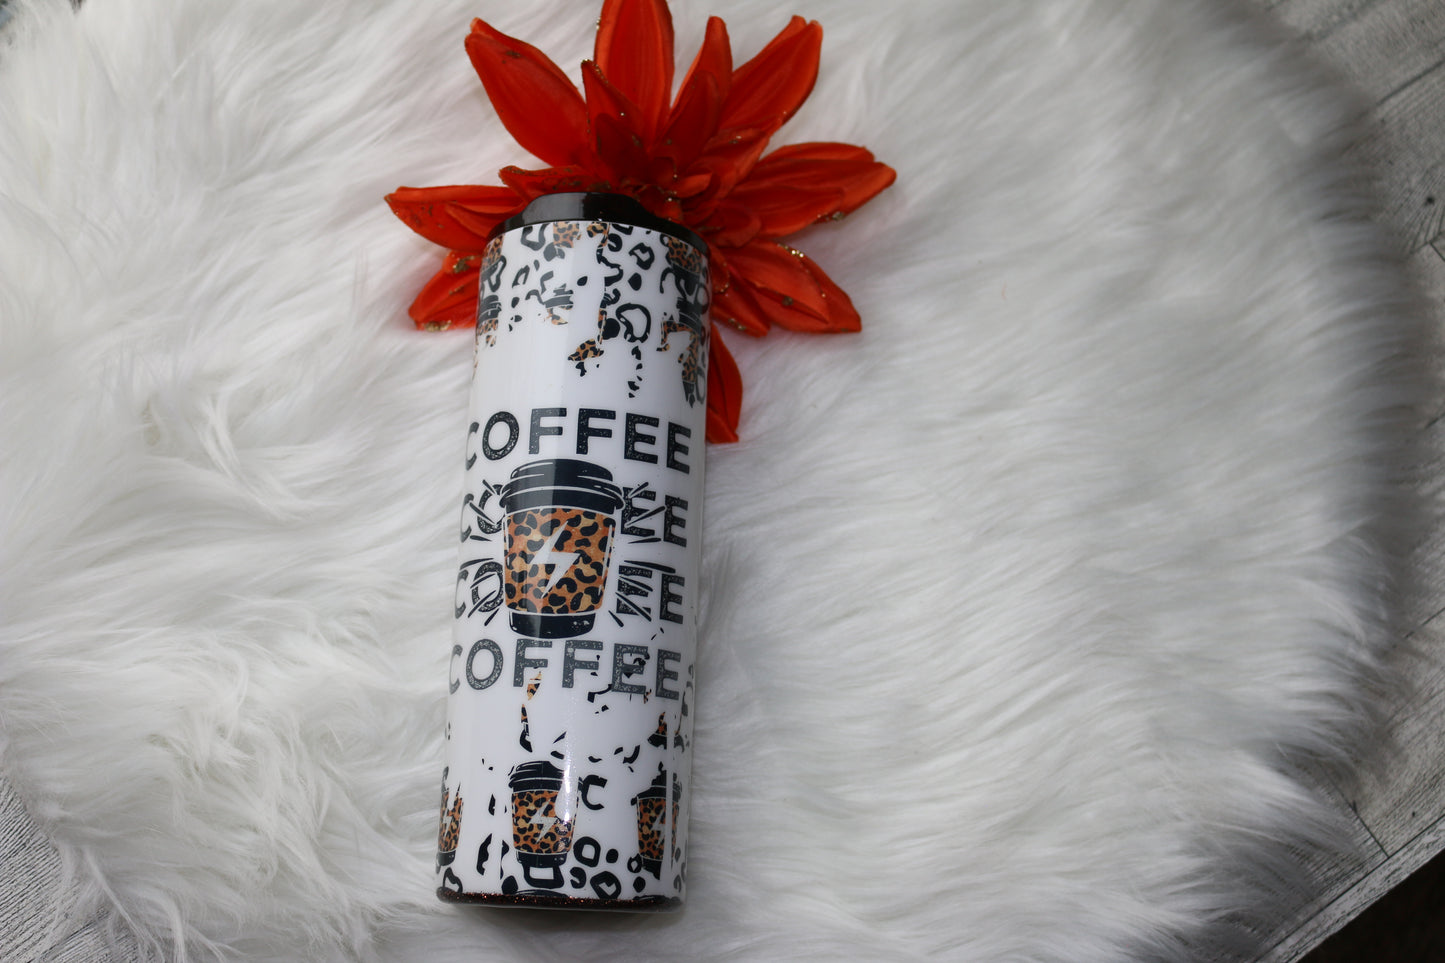 20 oz COFFEE Stainless Steal Tumbler